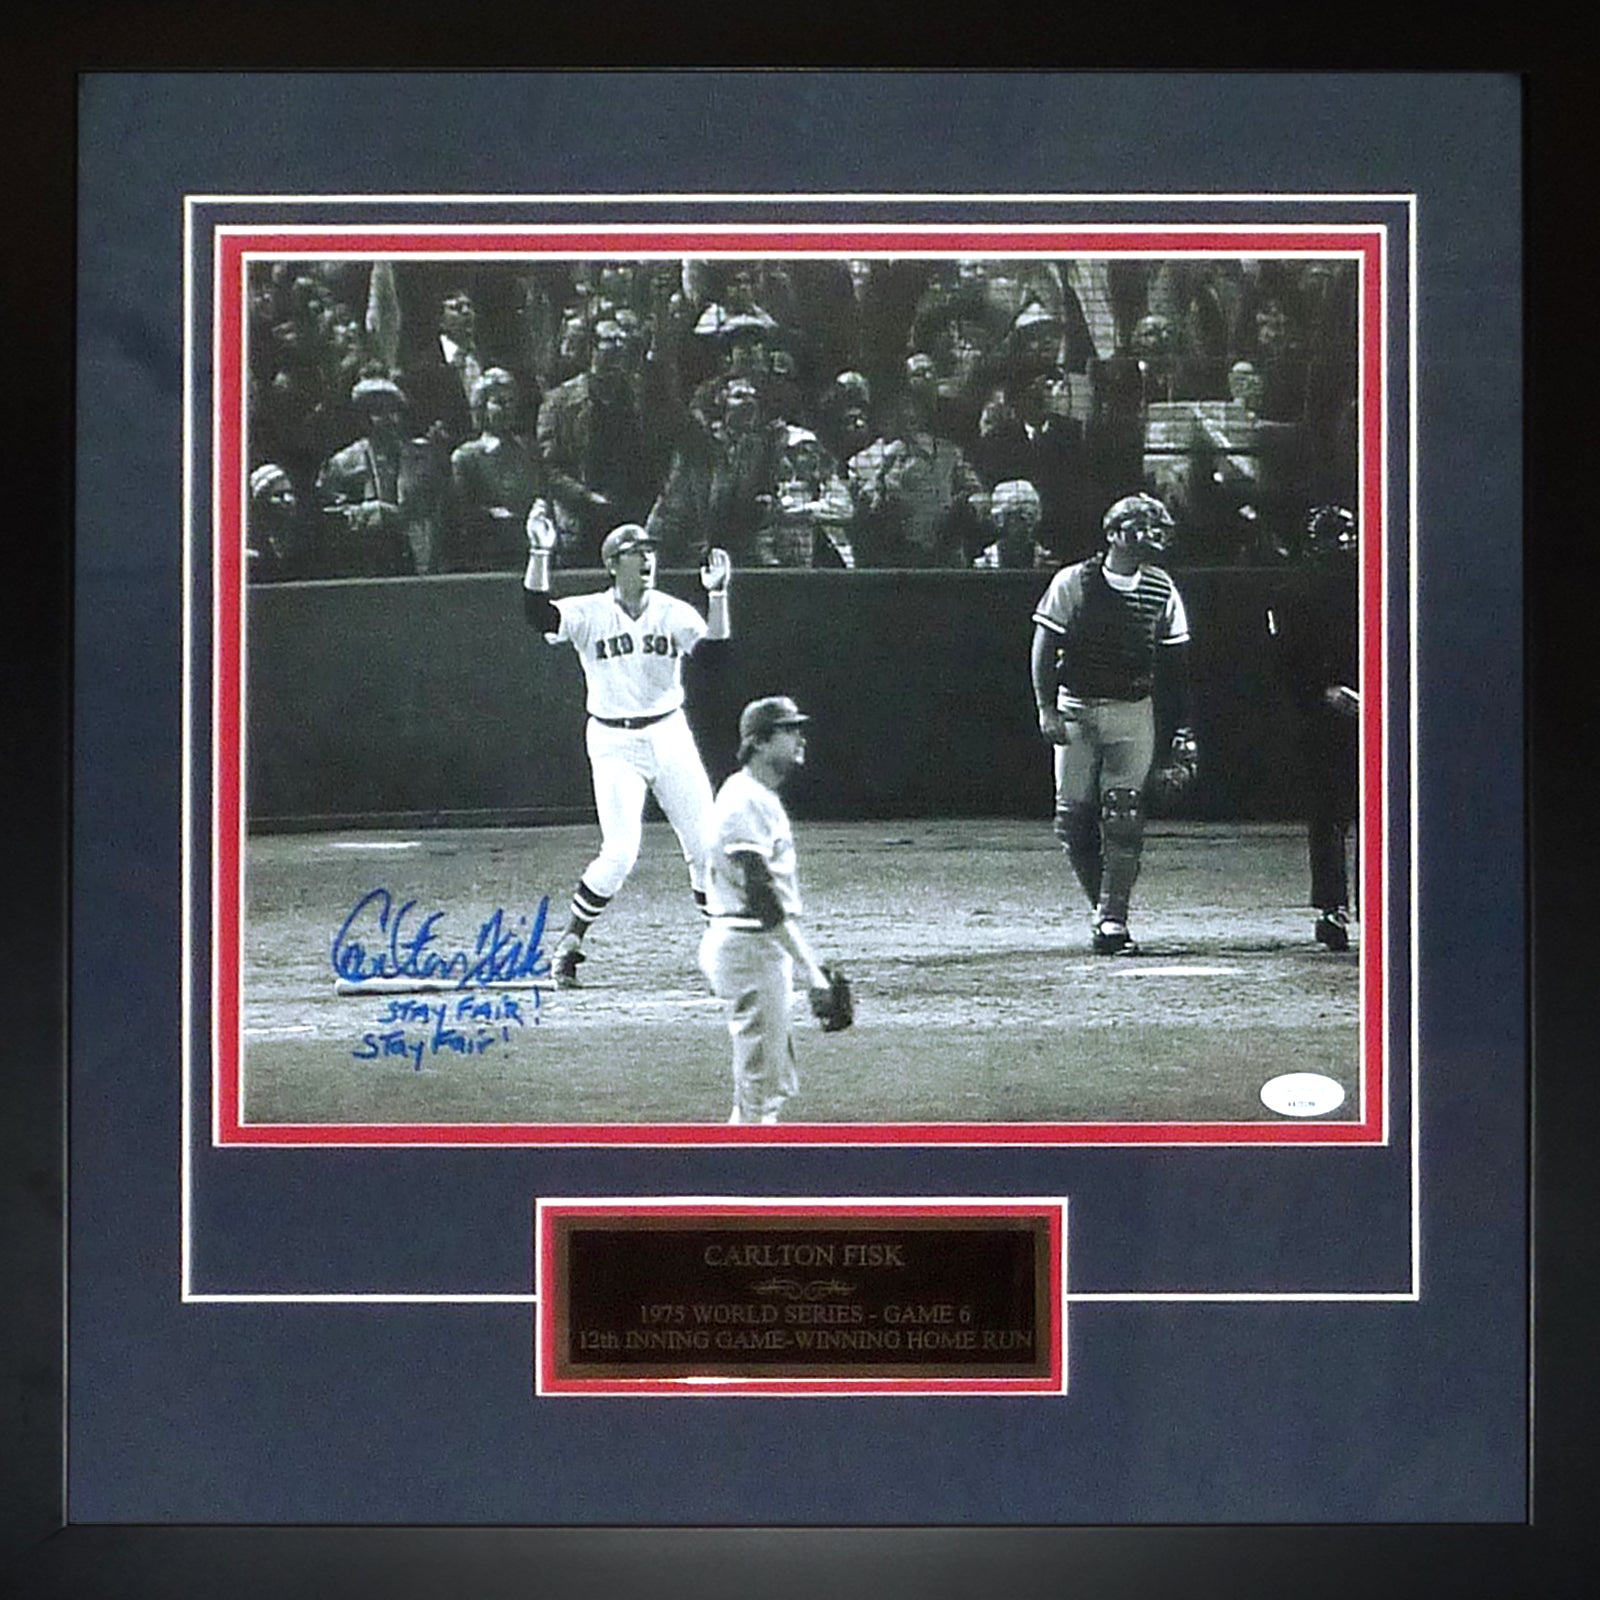 Carlton Fisk Autographed Boston Red Sox (1975 WS HR) Deluxe Framed 11x14 Photo w/ Nameplate - JSA